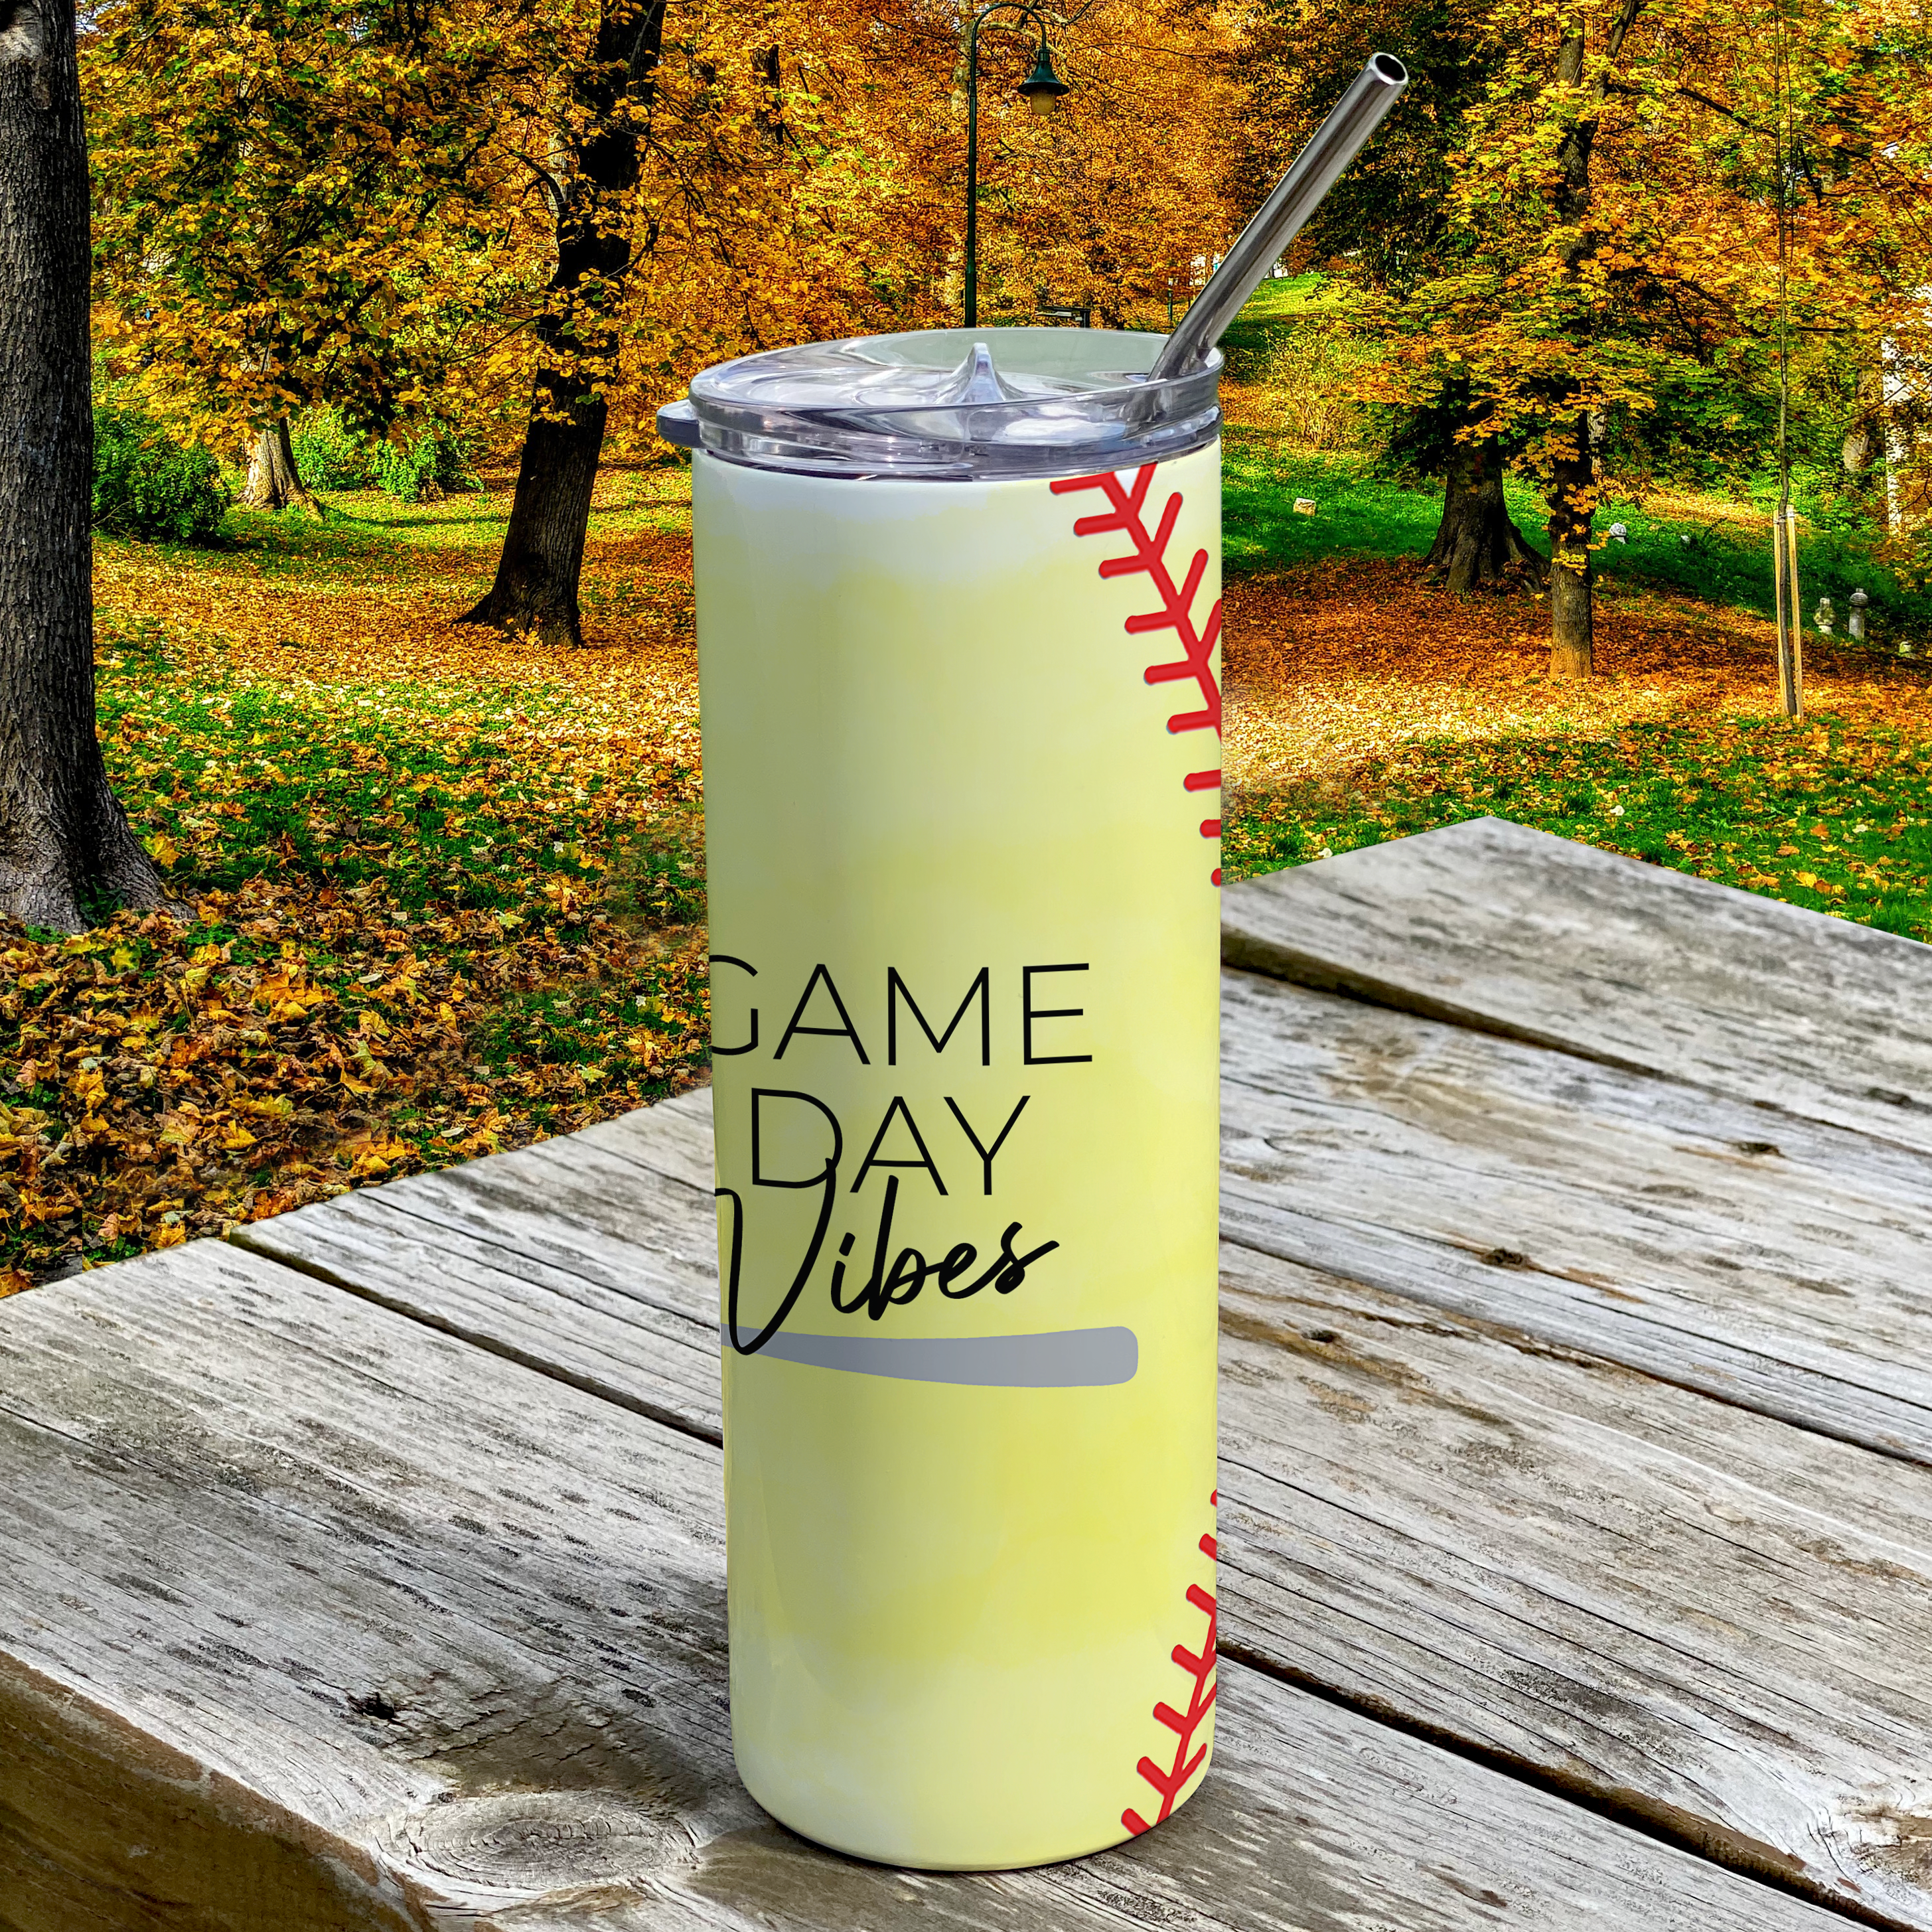 Sports Collection (Game Day Vibes - Softball) 20 Oz Stainless Steel Travel Tumbler with Straw